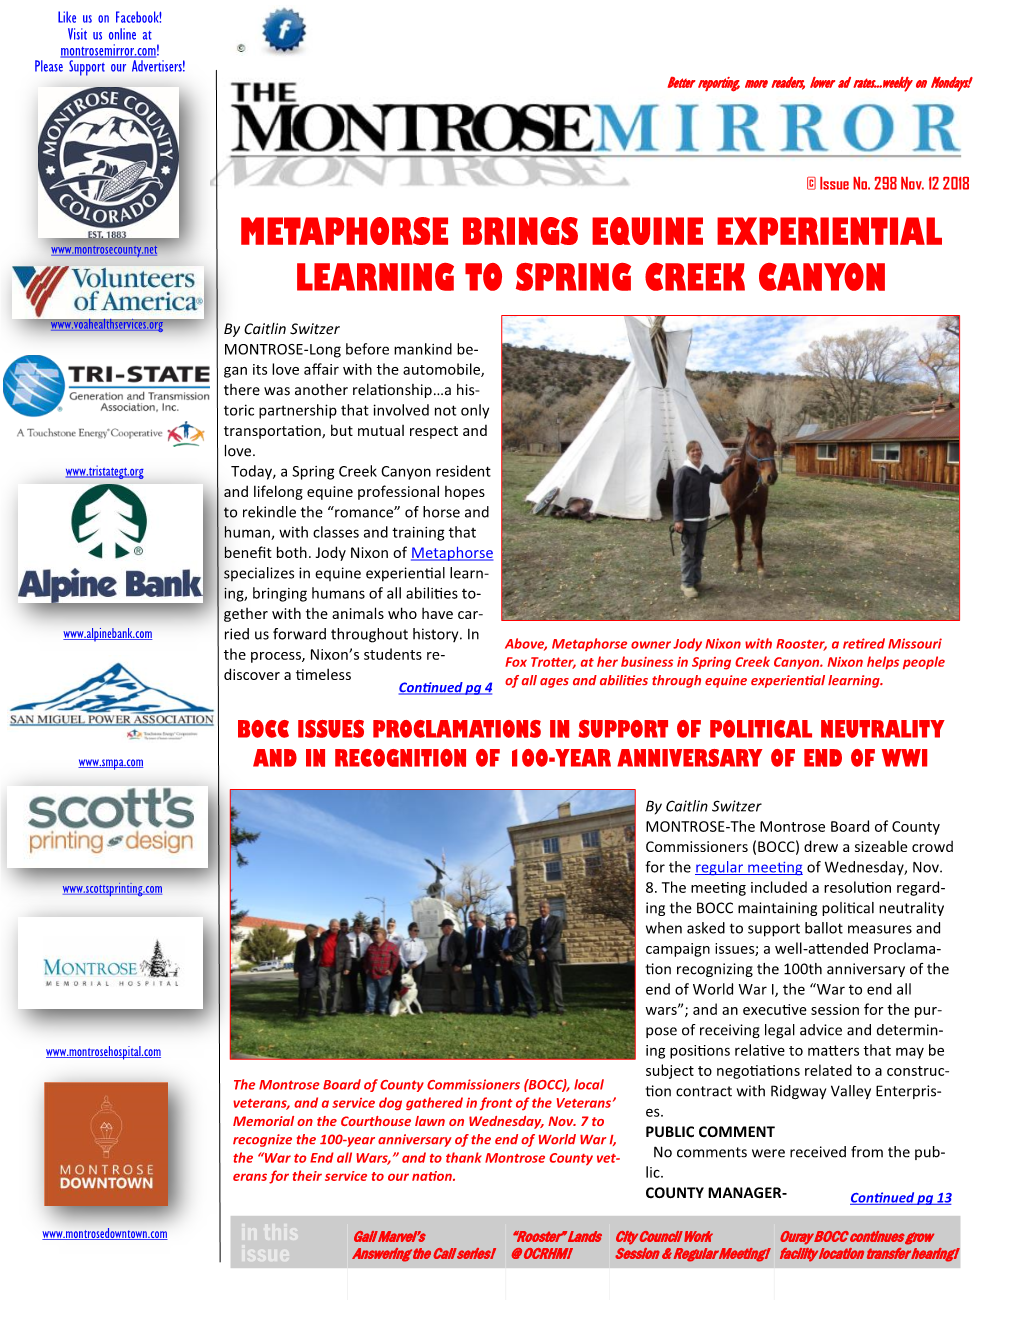 Metaphorse Brings Equine Experiential Learning to Spring Creek Canyon